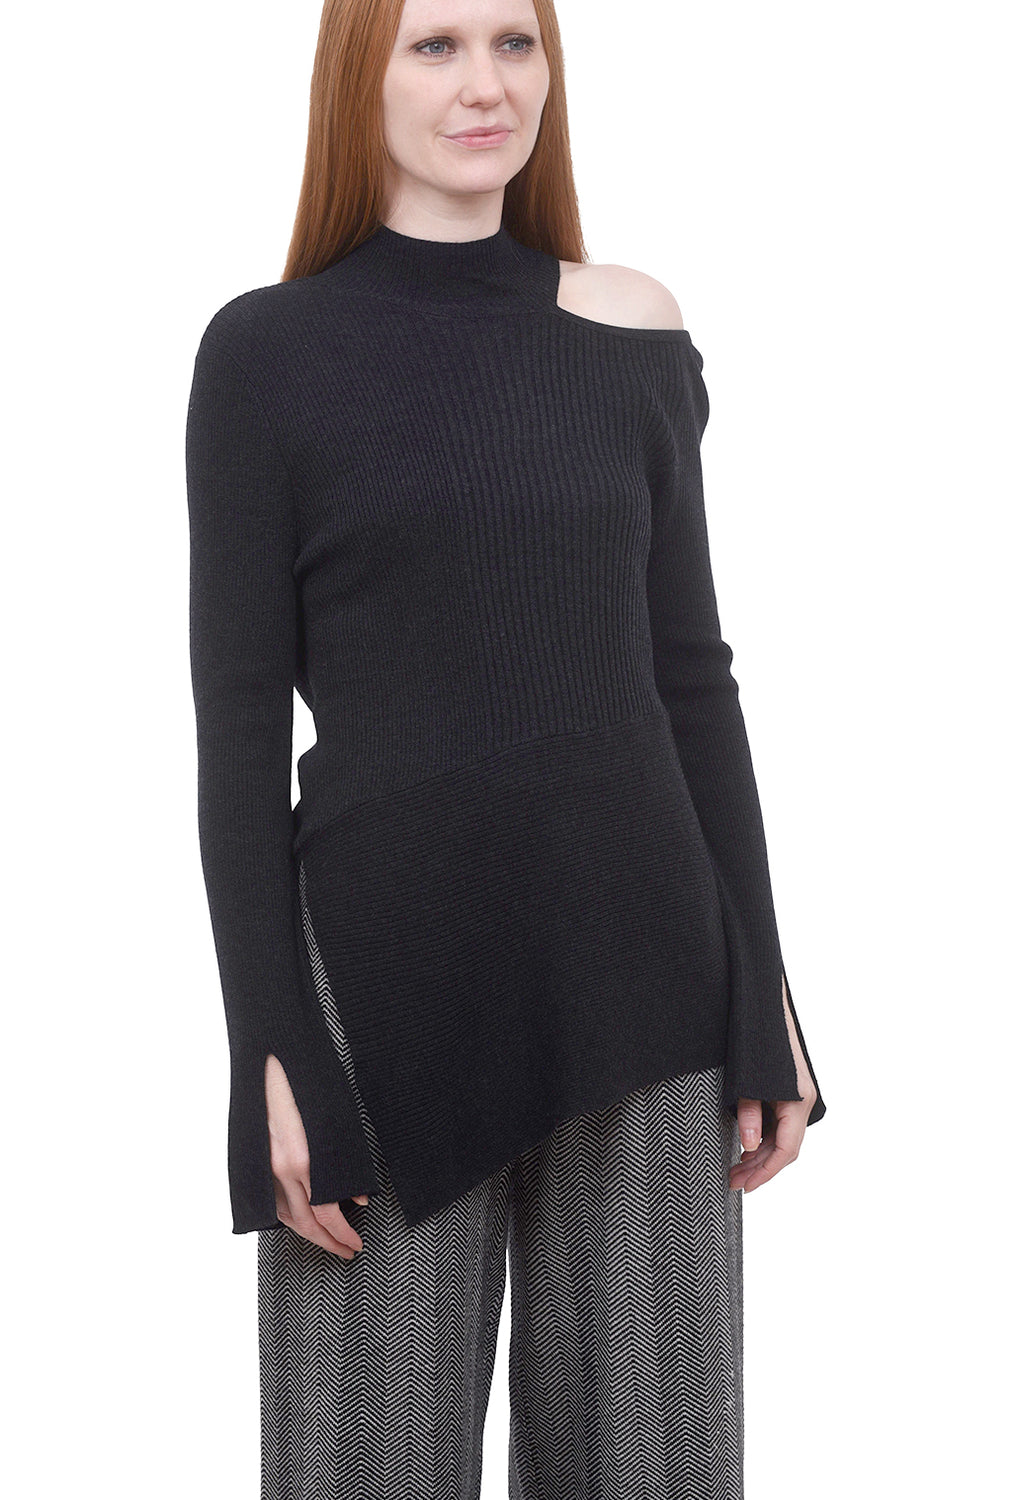 Lexi Open-Shoulder Sweater, Charcoal